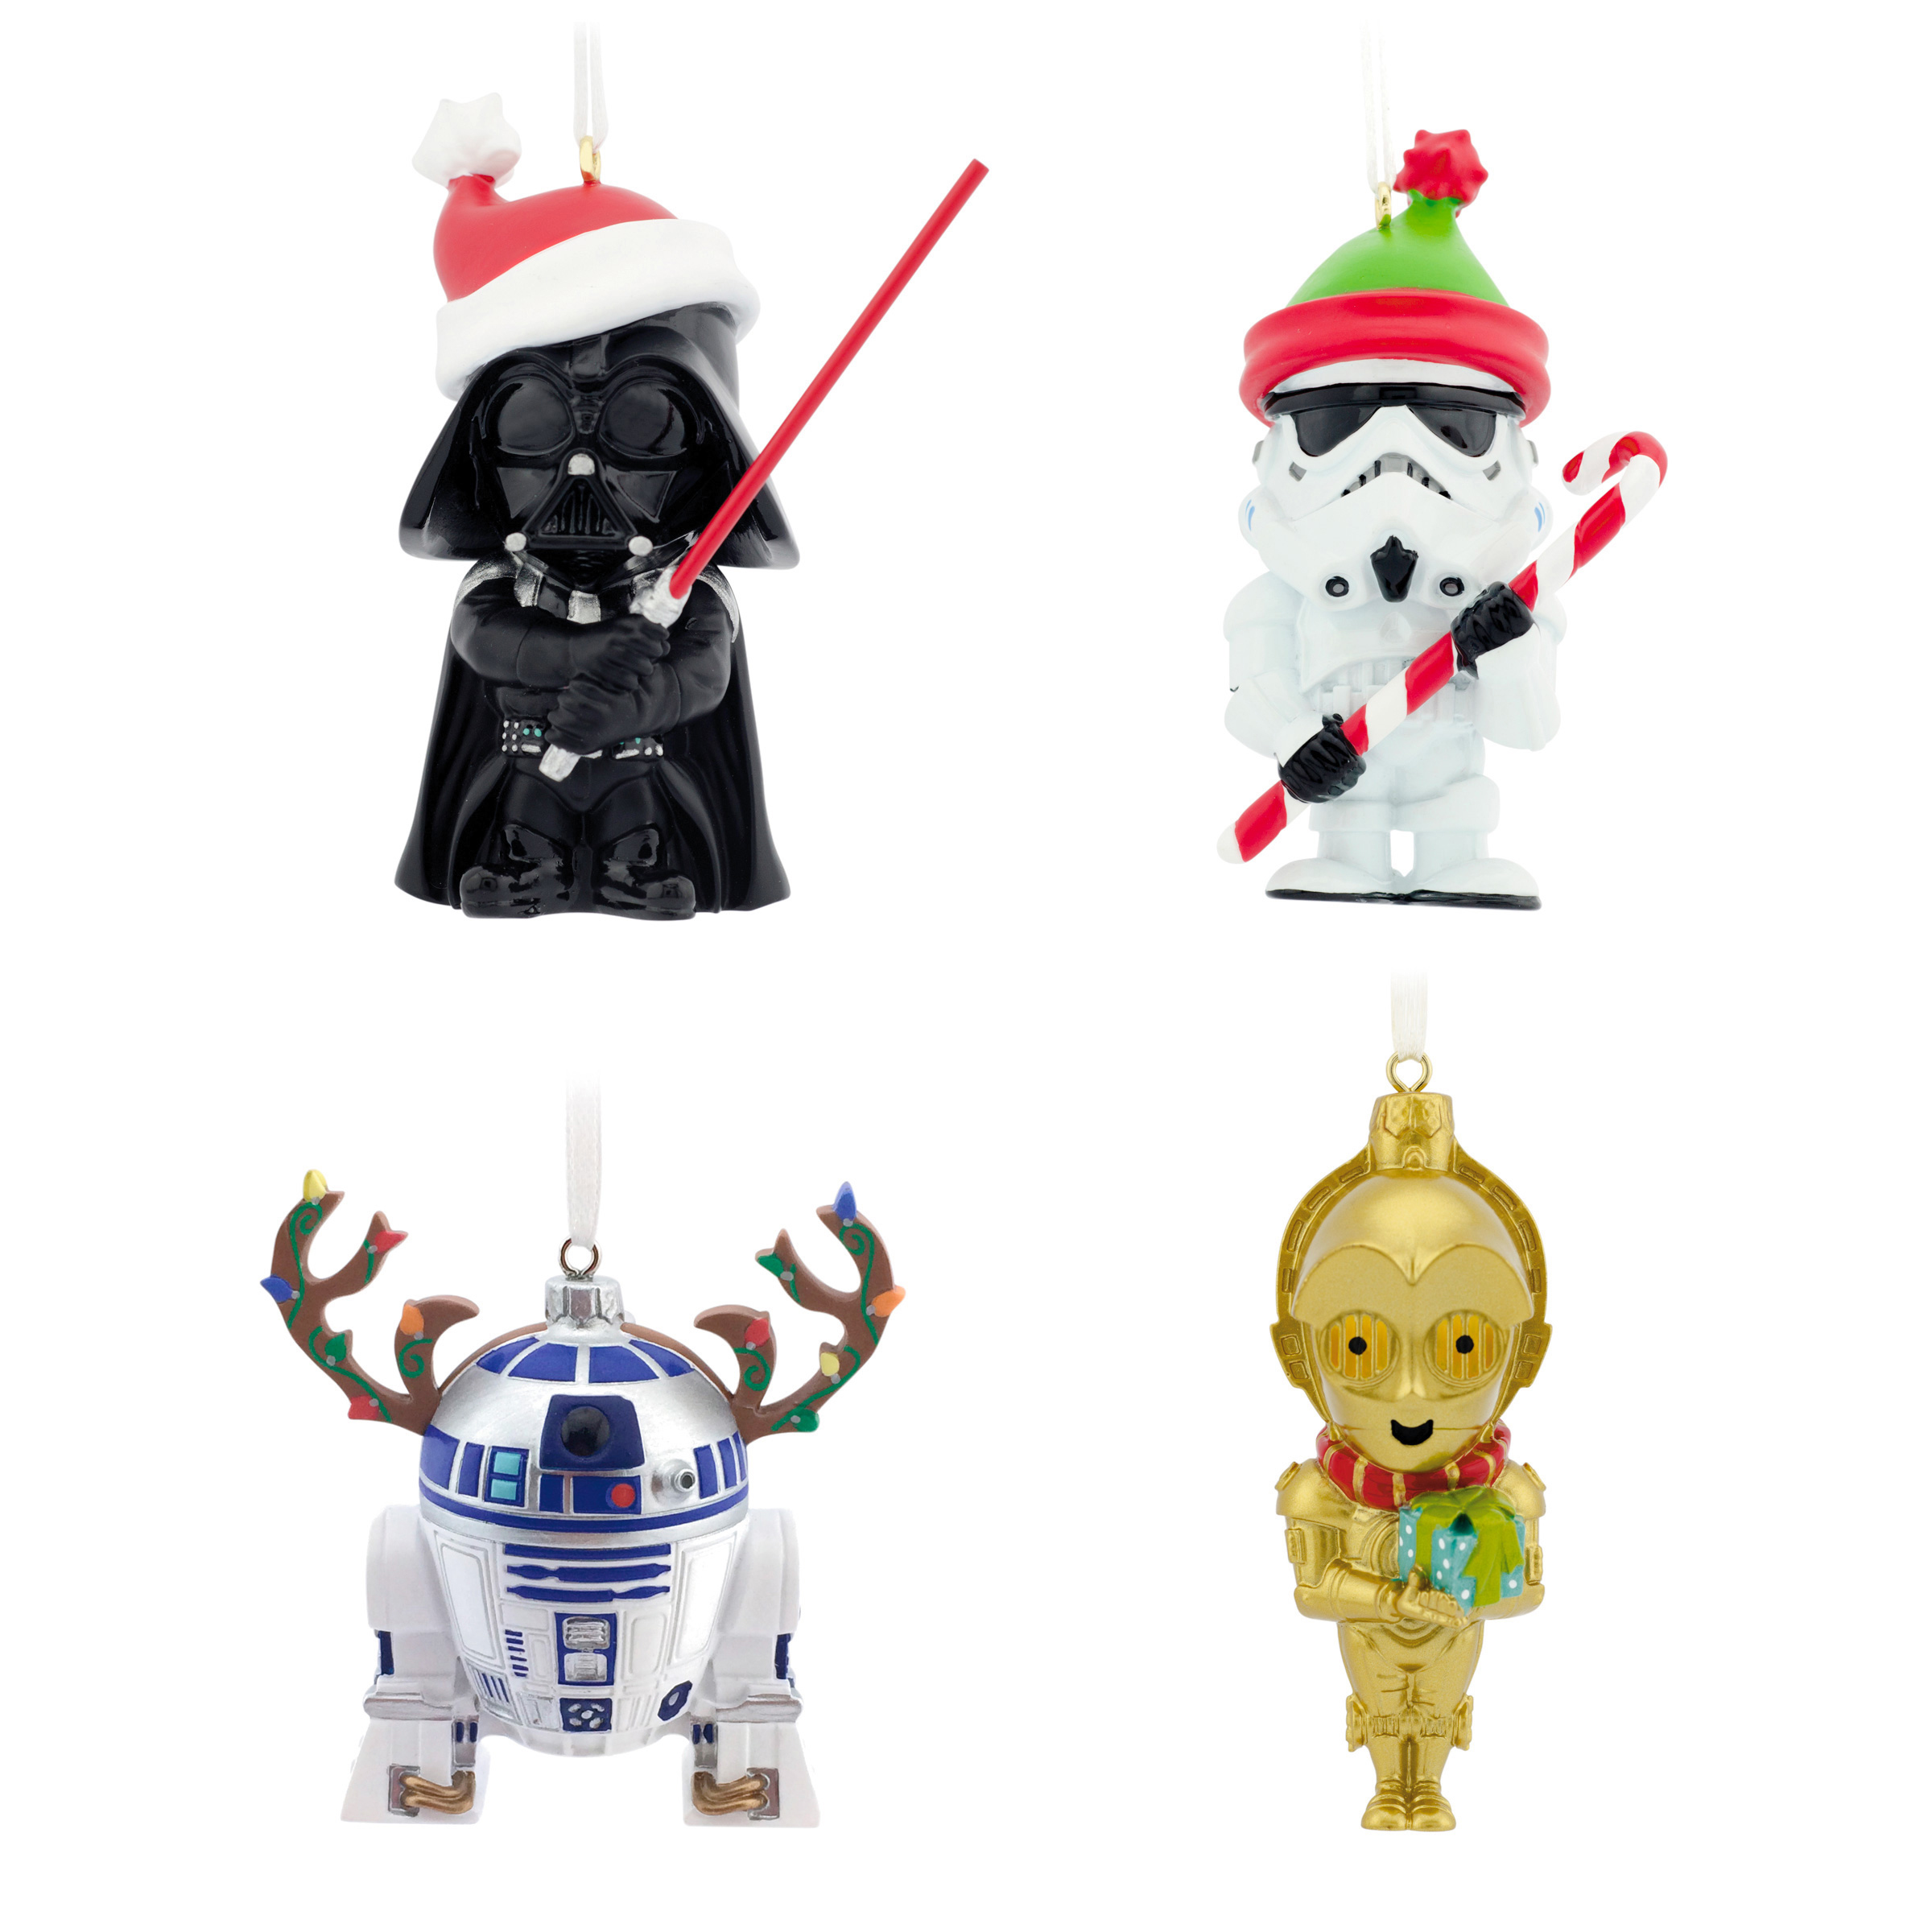 Details about   Star Wars Darth Vader Storm Troopers Ornament